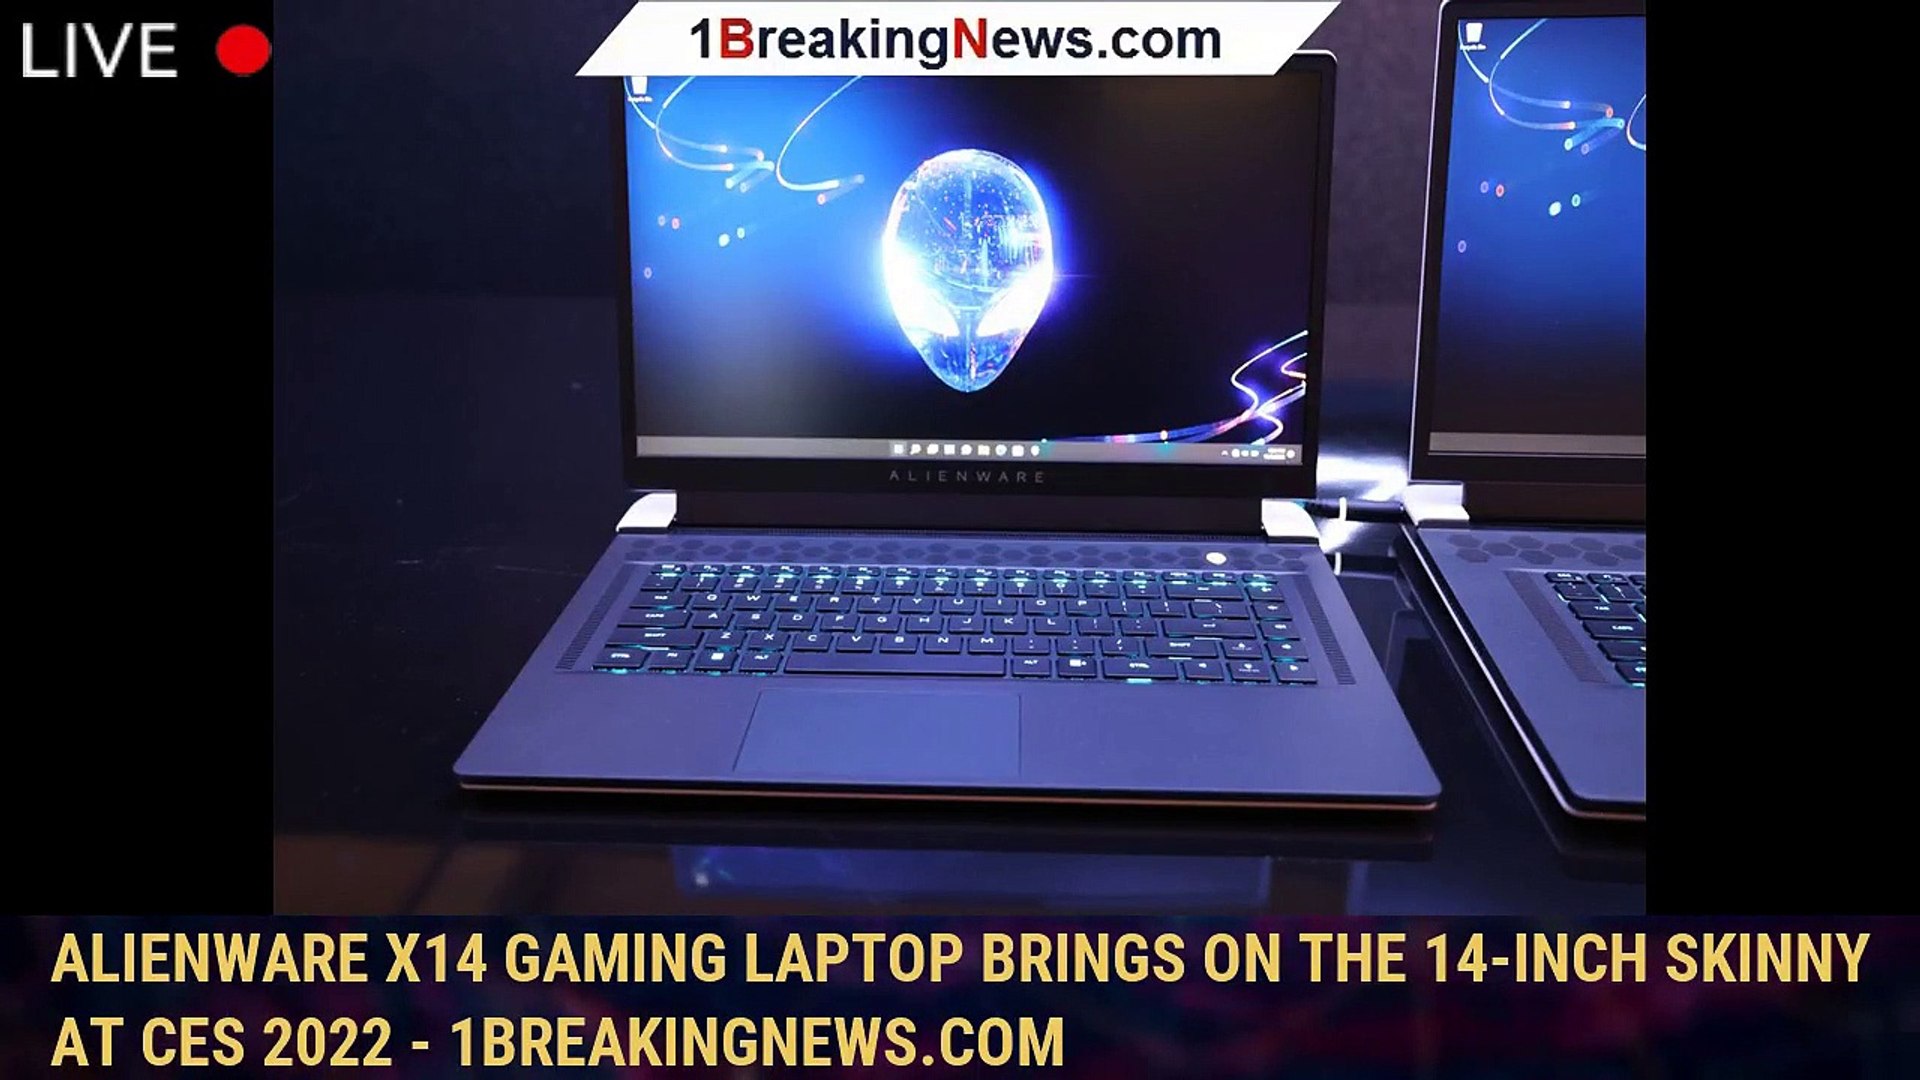 ⁣Alienware x14 gaming laptop brings on the 14-inch skinny at CES 2022 - 1BREAKINGNEWS.COM